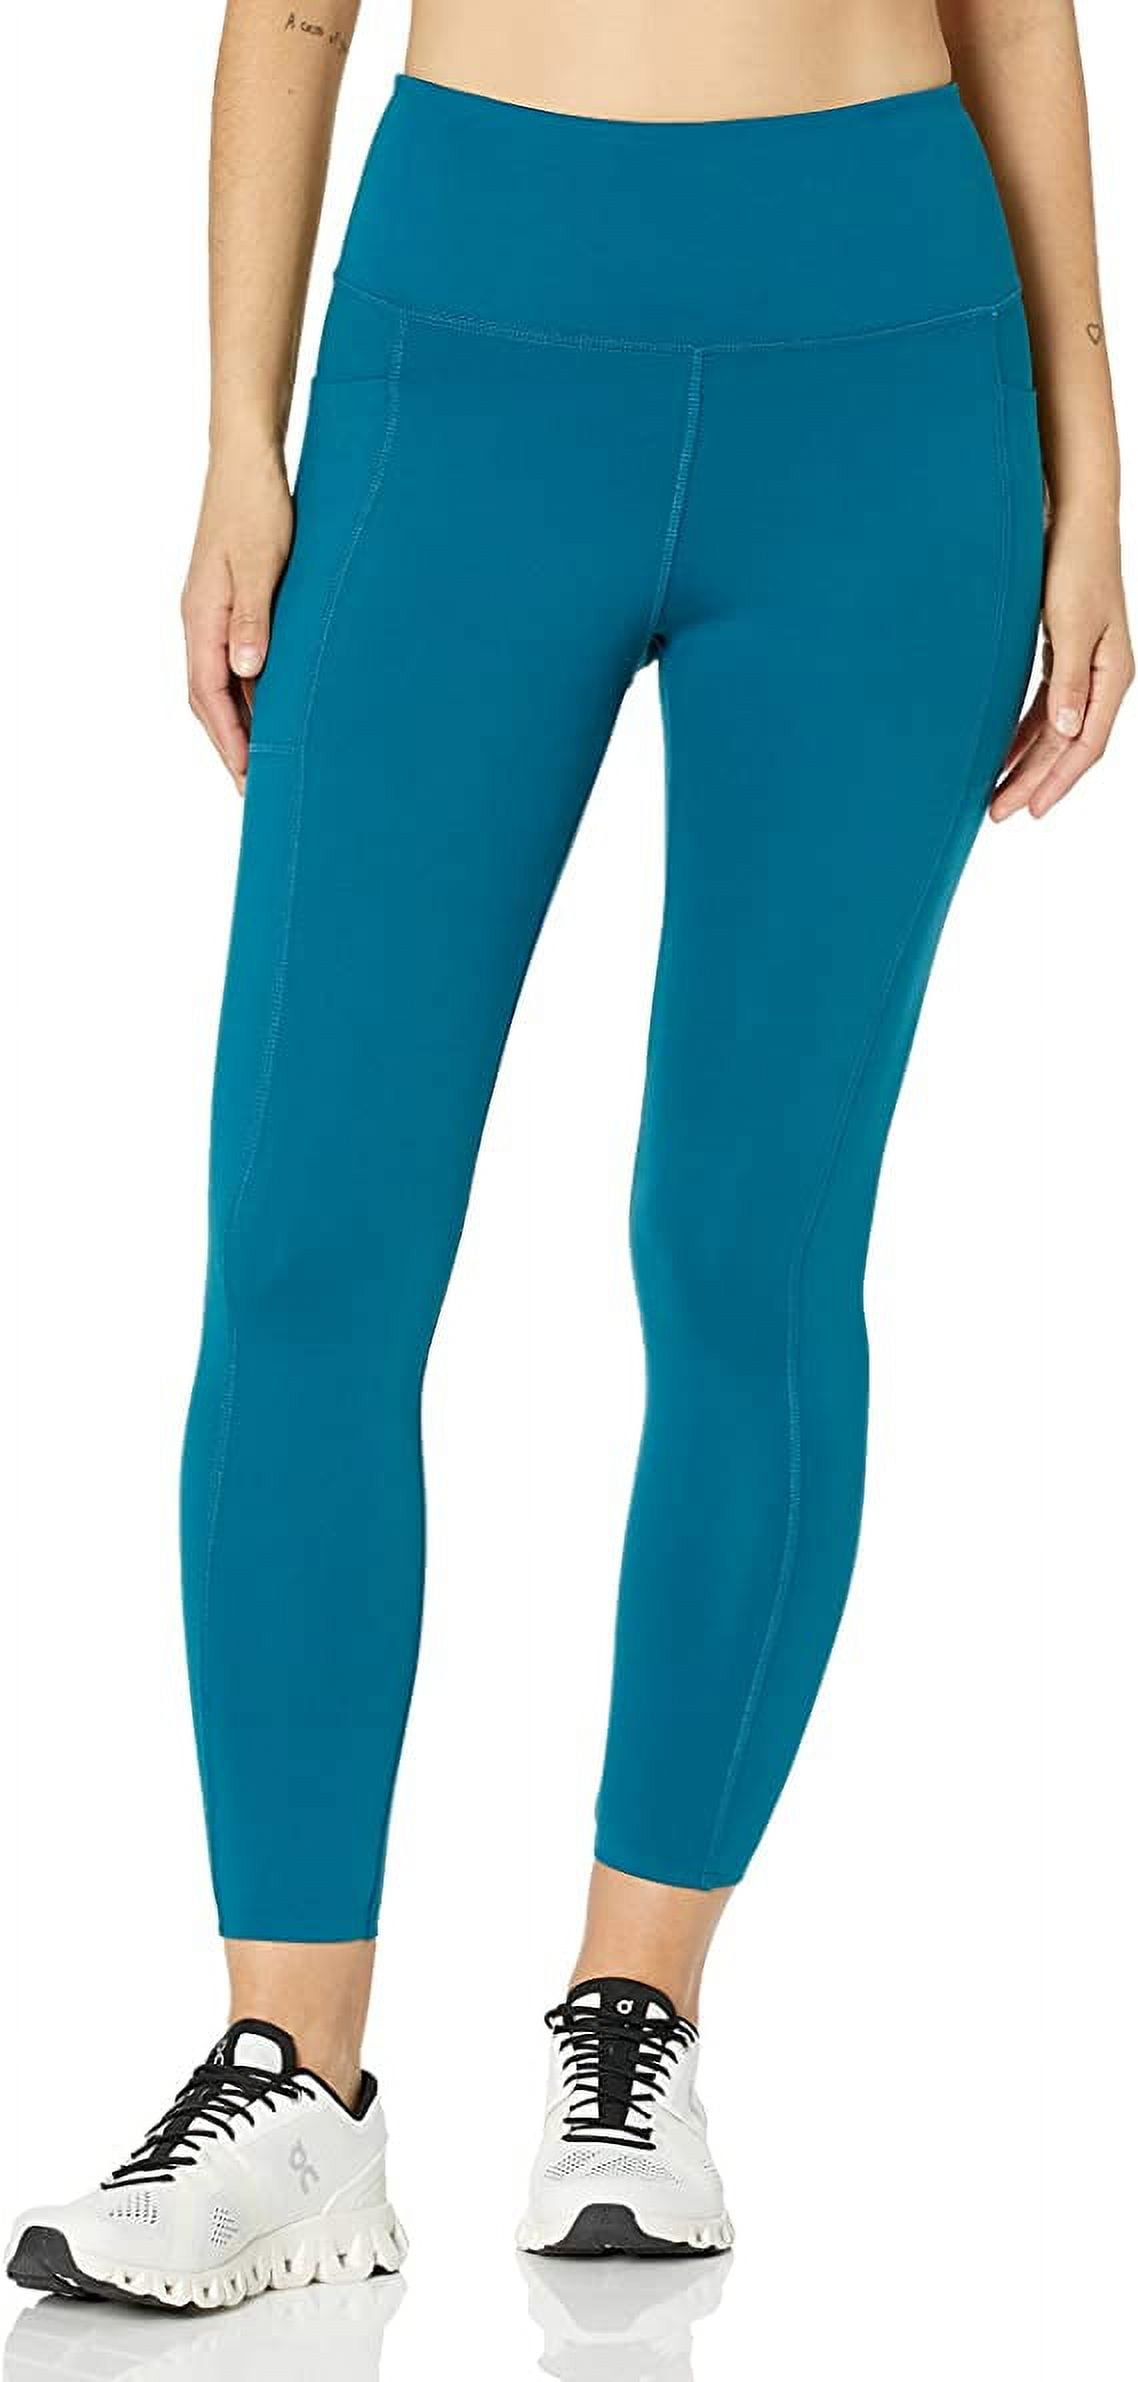 PREOWNED Danskin Ladies' Active Tight with Pockets Interlock